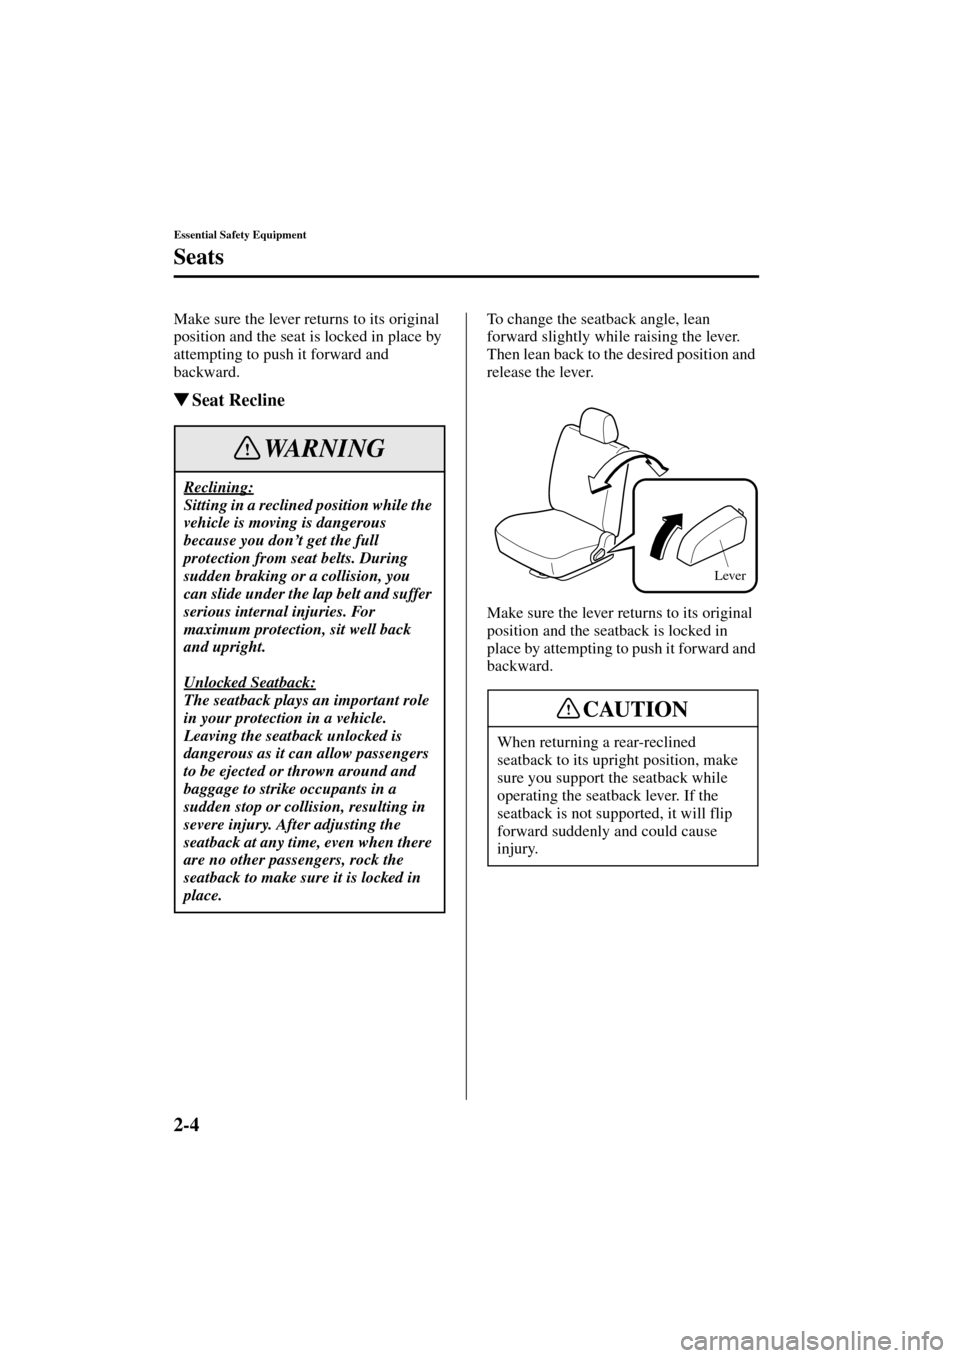 MAZDA MODEL MPV 2004  Owners Manual (in English) 2-4
Essential Safety Equipment
Seats
Form No. 8S06-EA-03H
Make sure the lever returns to its original 
position and the seat is locked in place by 
attempting to push it forward and 
backward. 
Seat 